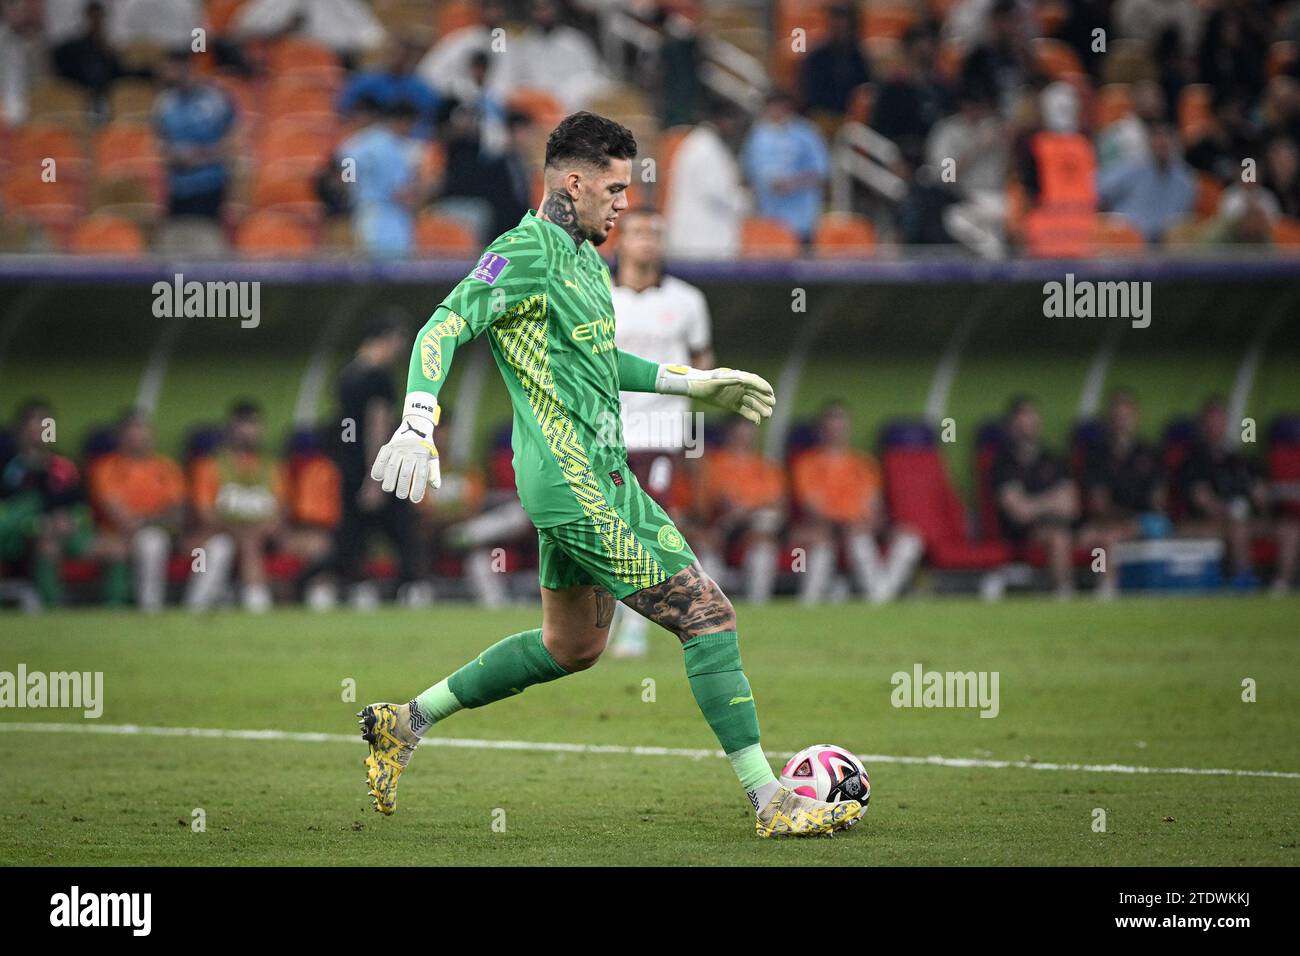 Jeddah, Saudi Arabia. 19th Dec, 2023. King Abdullah Sports City Goalkeeper Ederson Moraes of Manchester City in action during the FIFA Club World Cup Semi Final between Urawa Reds of Japan and Manchester City of England at the King Abdullah Sports City Stadium in Jeddah, Saudi Arabia. City won the game 3-0 and will play Fluminense of Brazil in the final on Friday. (Alexandre Neto/SPP) Credit: SPP Sport Press Photo. /Alamy Live News Stock Photo